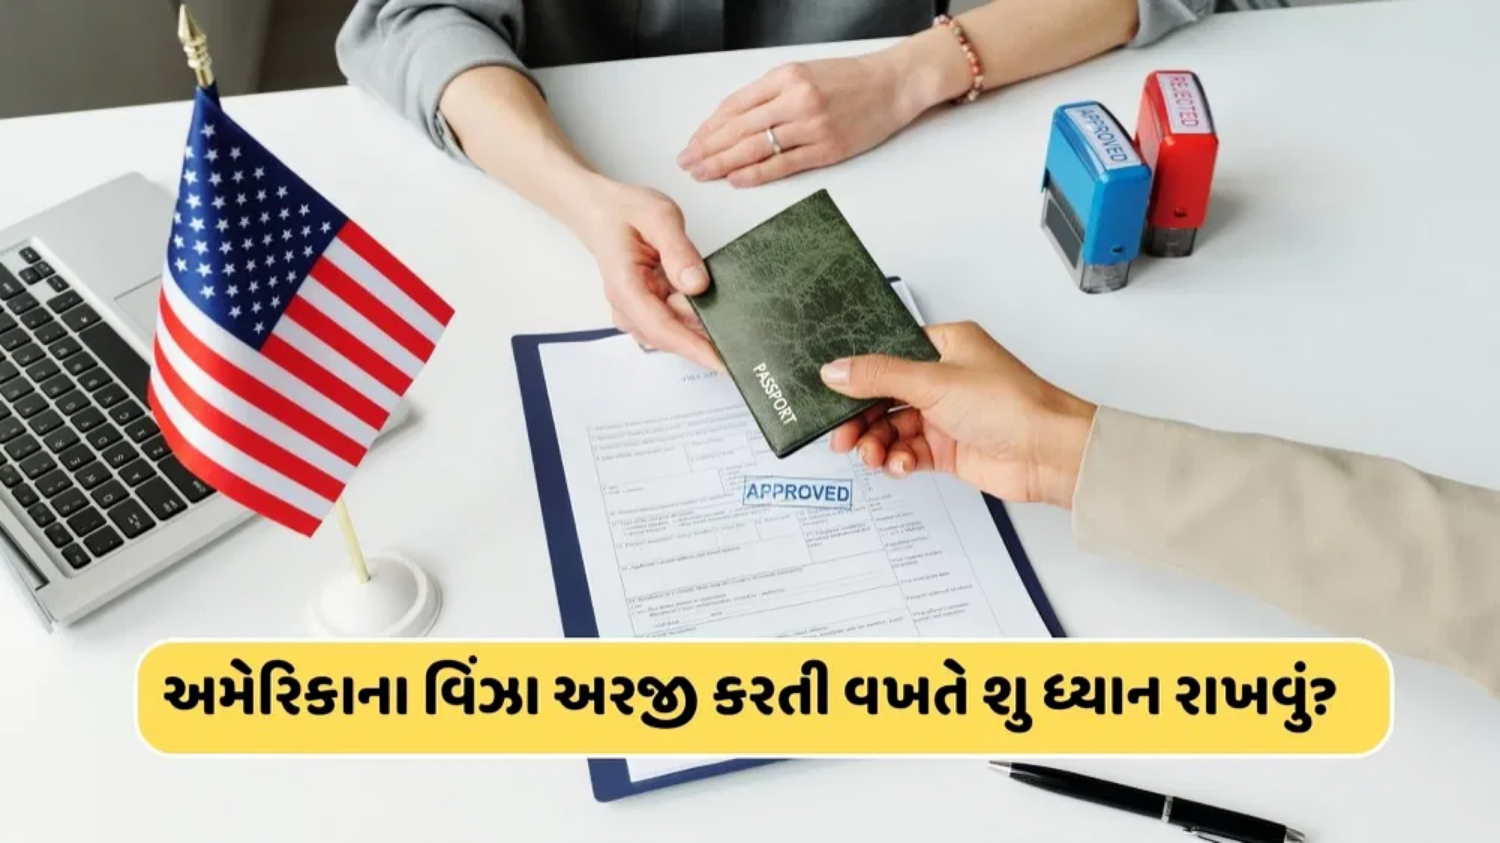 Picture of Do you want to go to America? So keep this in mind while applying for visa 